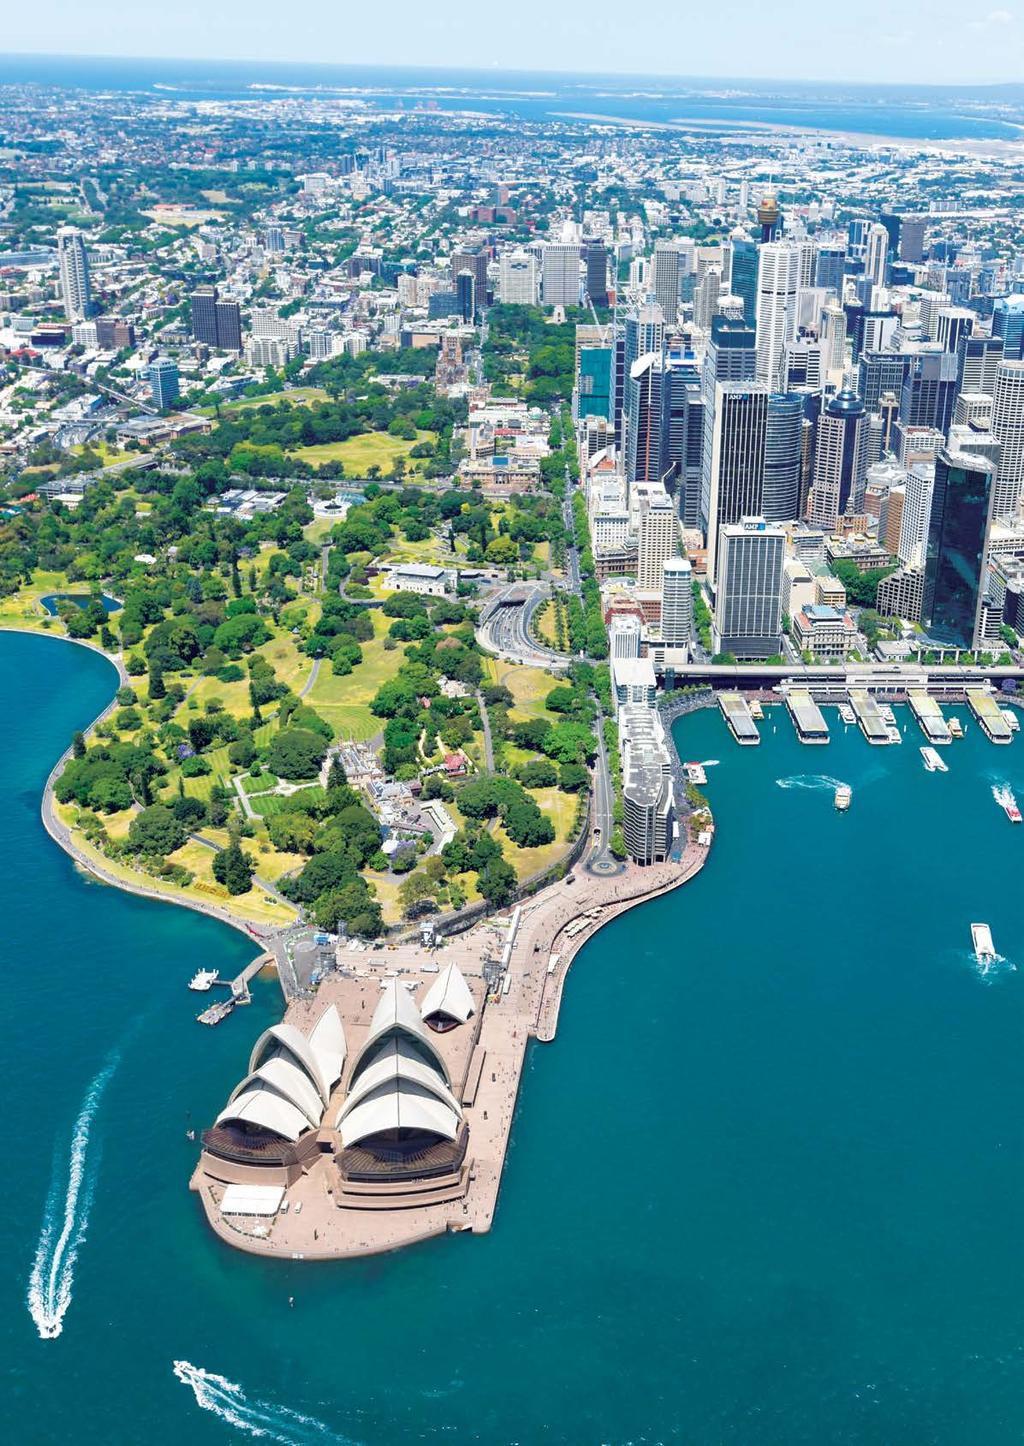 Sydney s population is currently 4.6 million and in 20 years it will jump to more than 6 million.